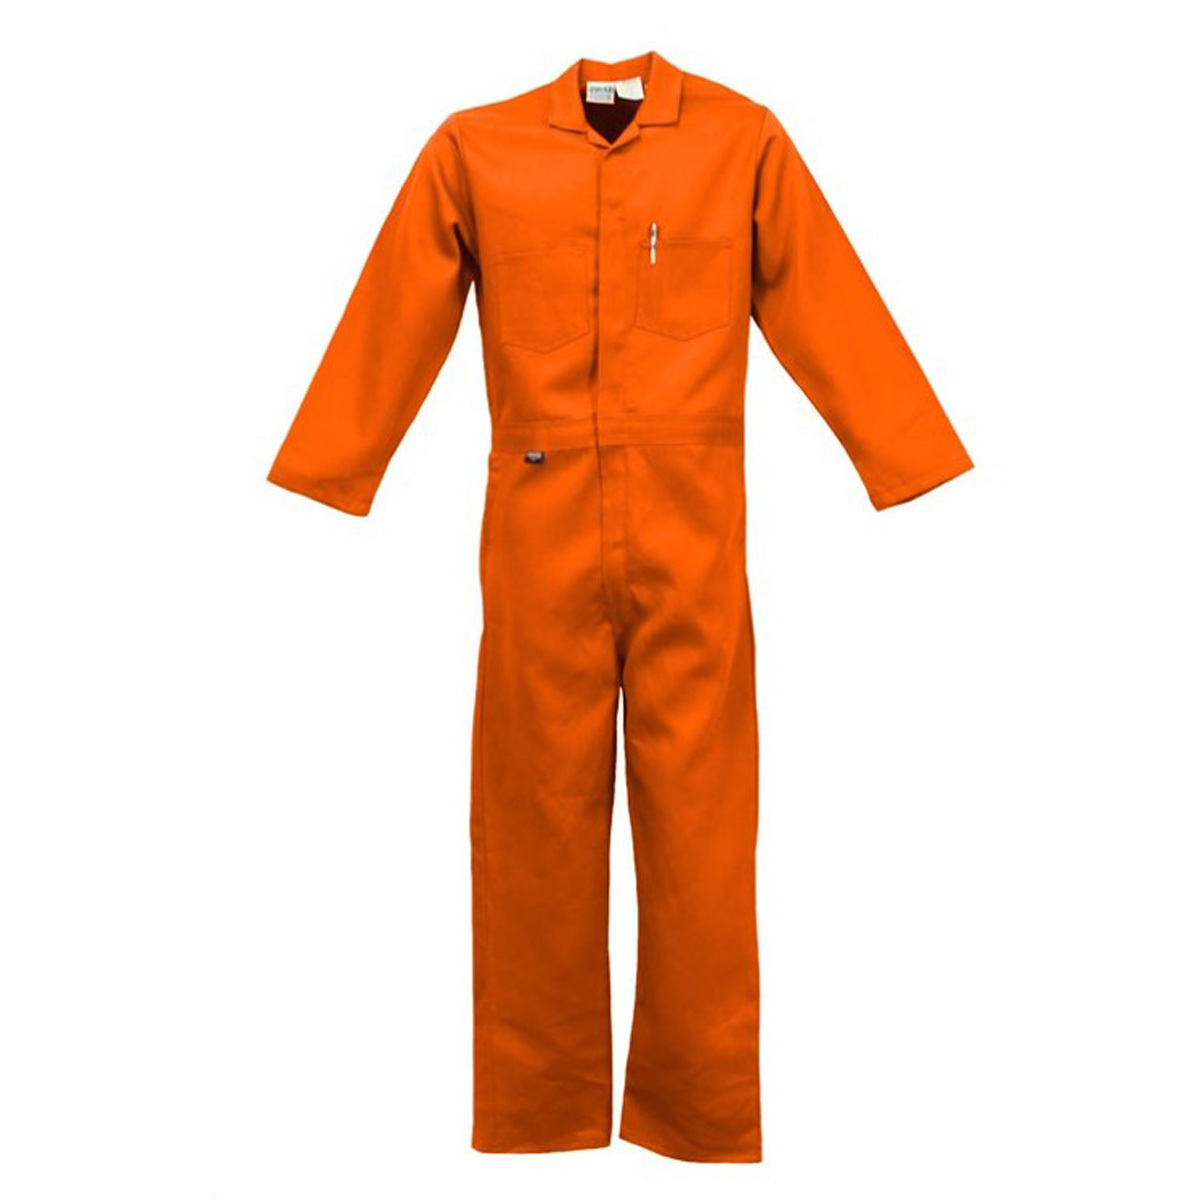 Stanco Safety Products™ Size 3X Tall Orange Indura® Arc Rated Flame Resistant Coveralls With Front Zipper Closure